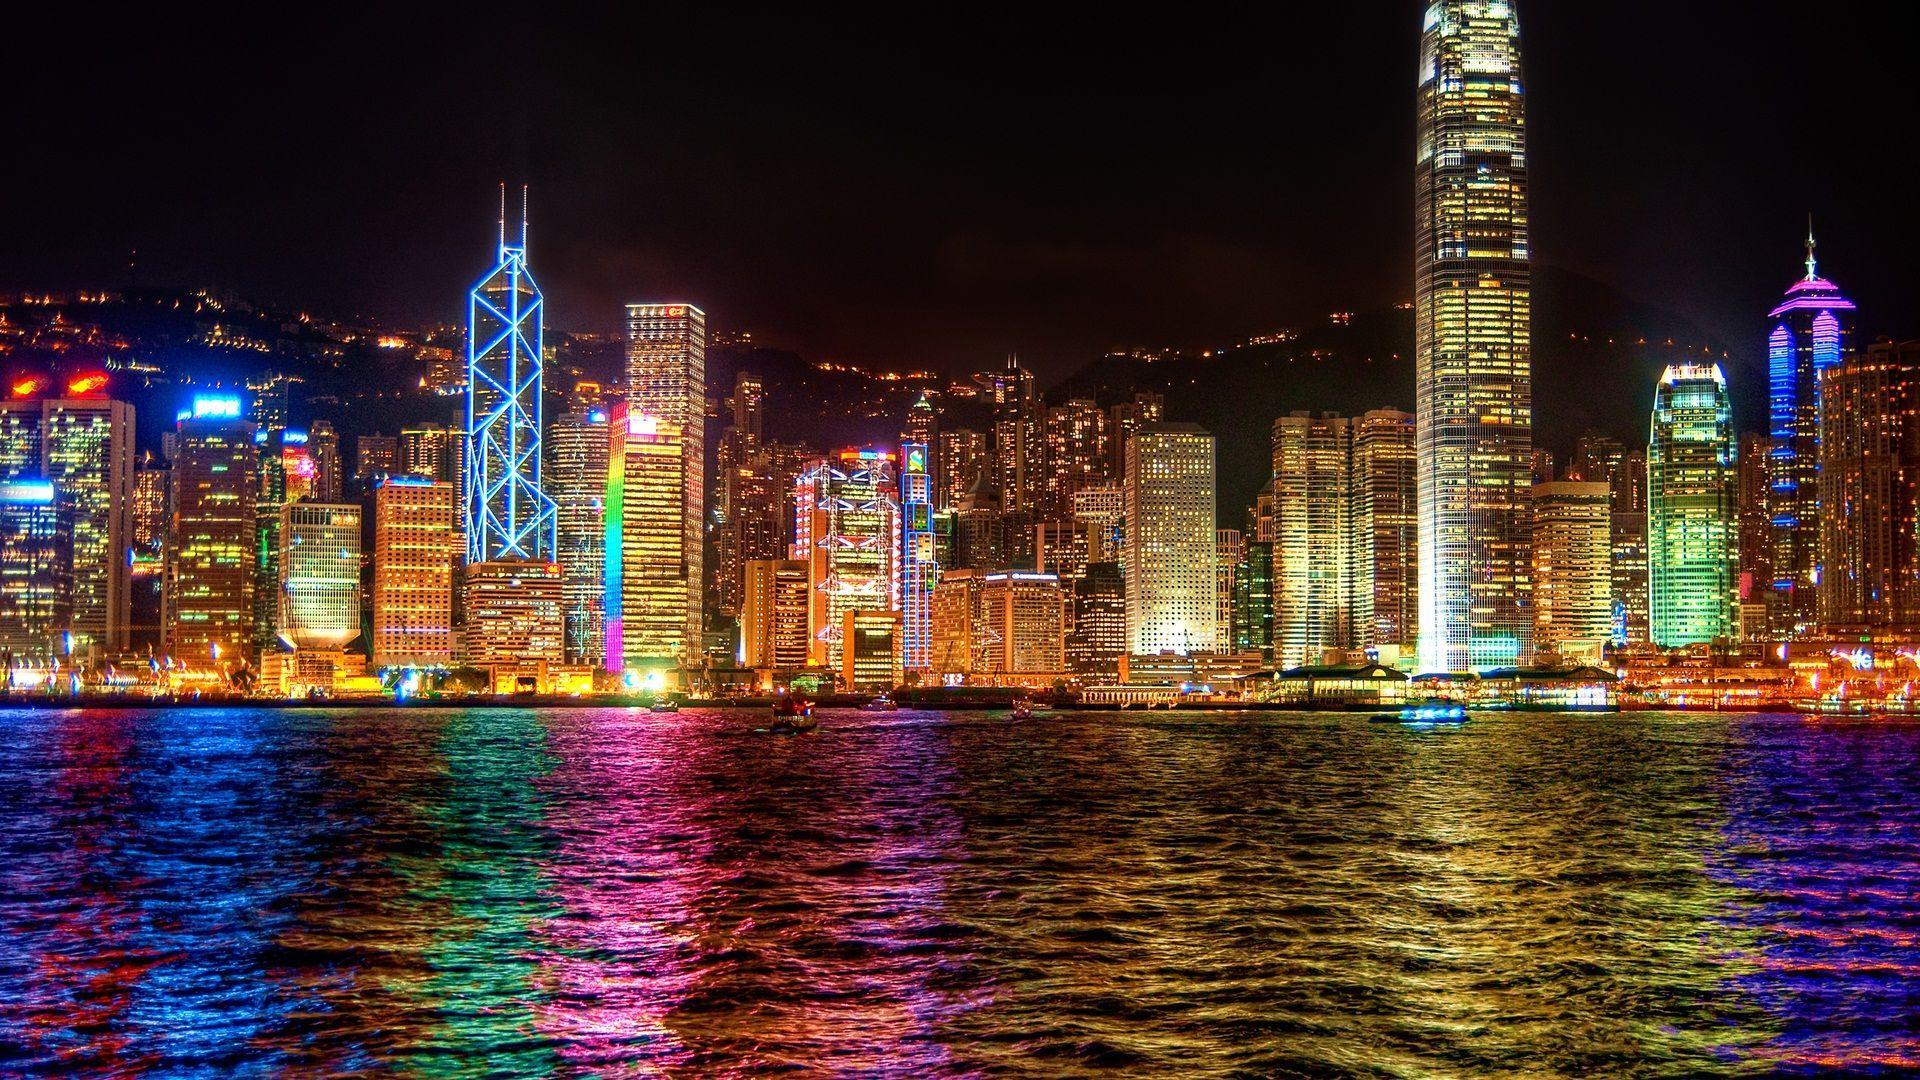 Cool High Definition Wallpaper. Most Beautiful Cities, City Lights At Night, City Wallpaper